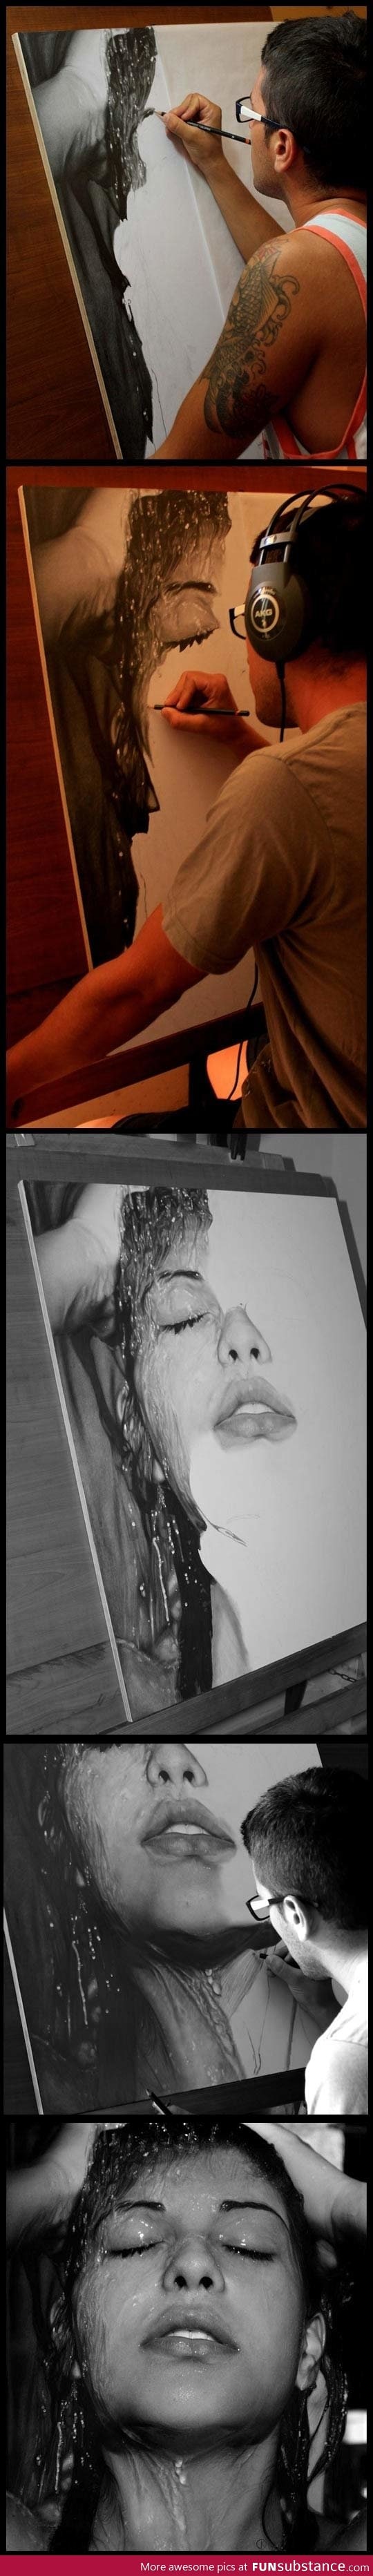 Mind-Blowing photorealistic pencil drawing